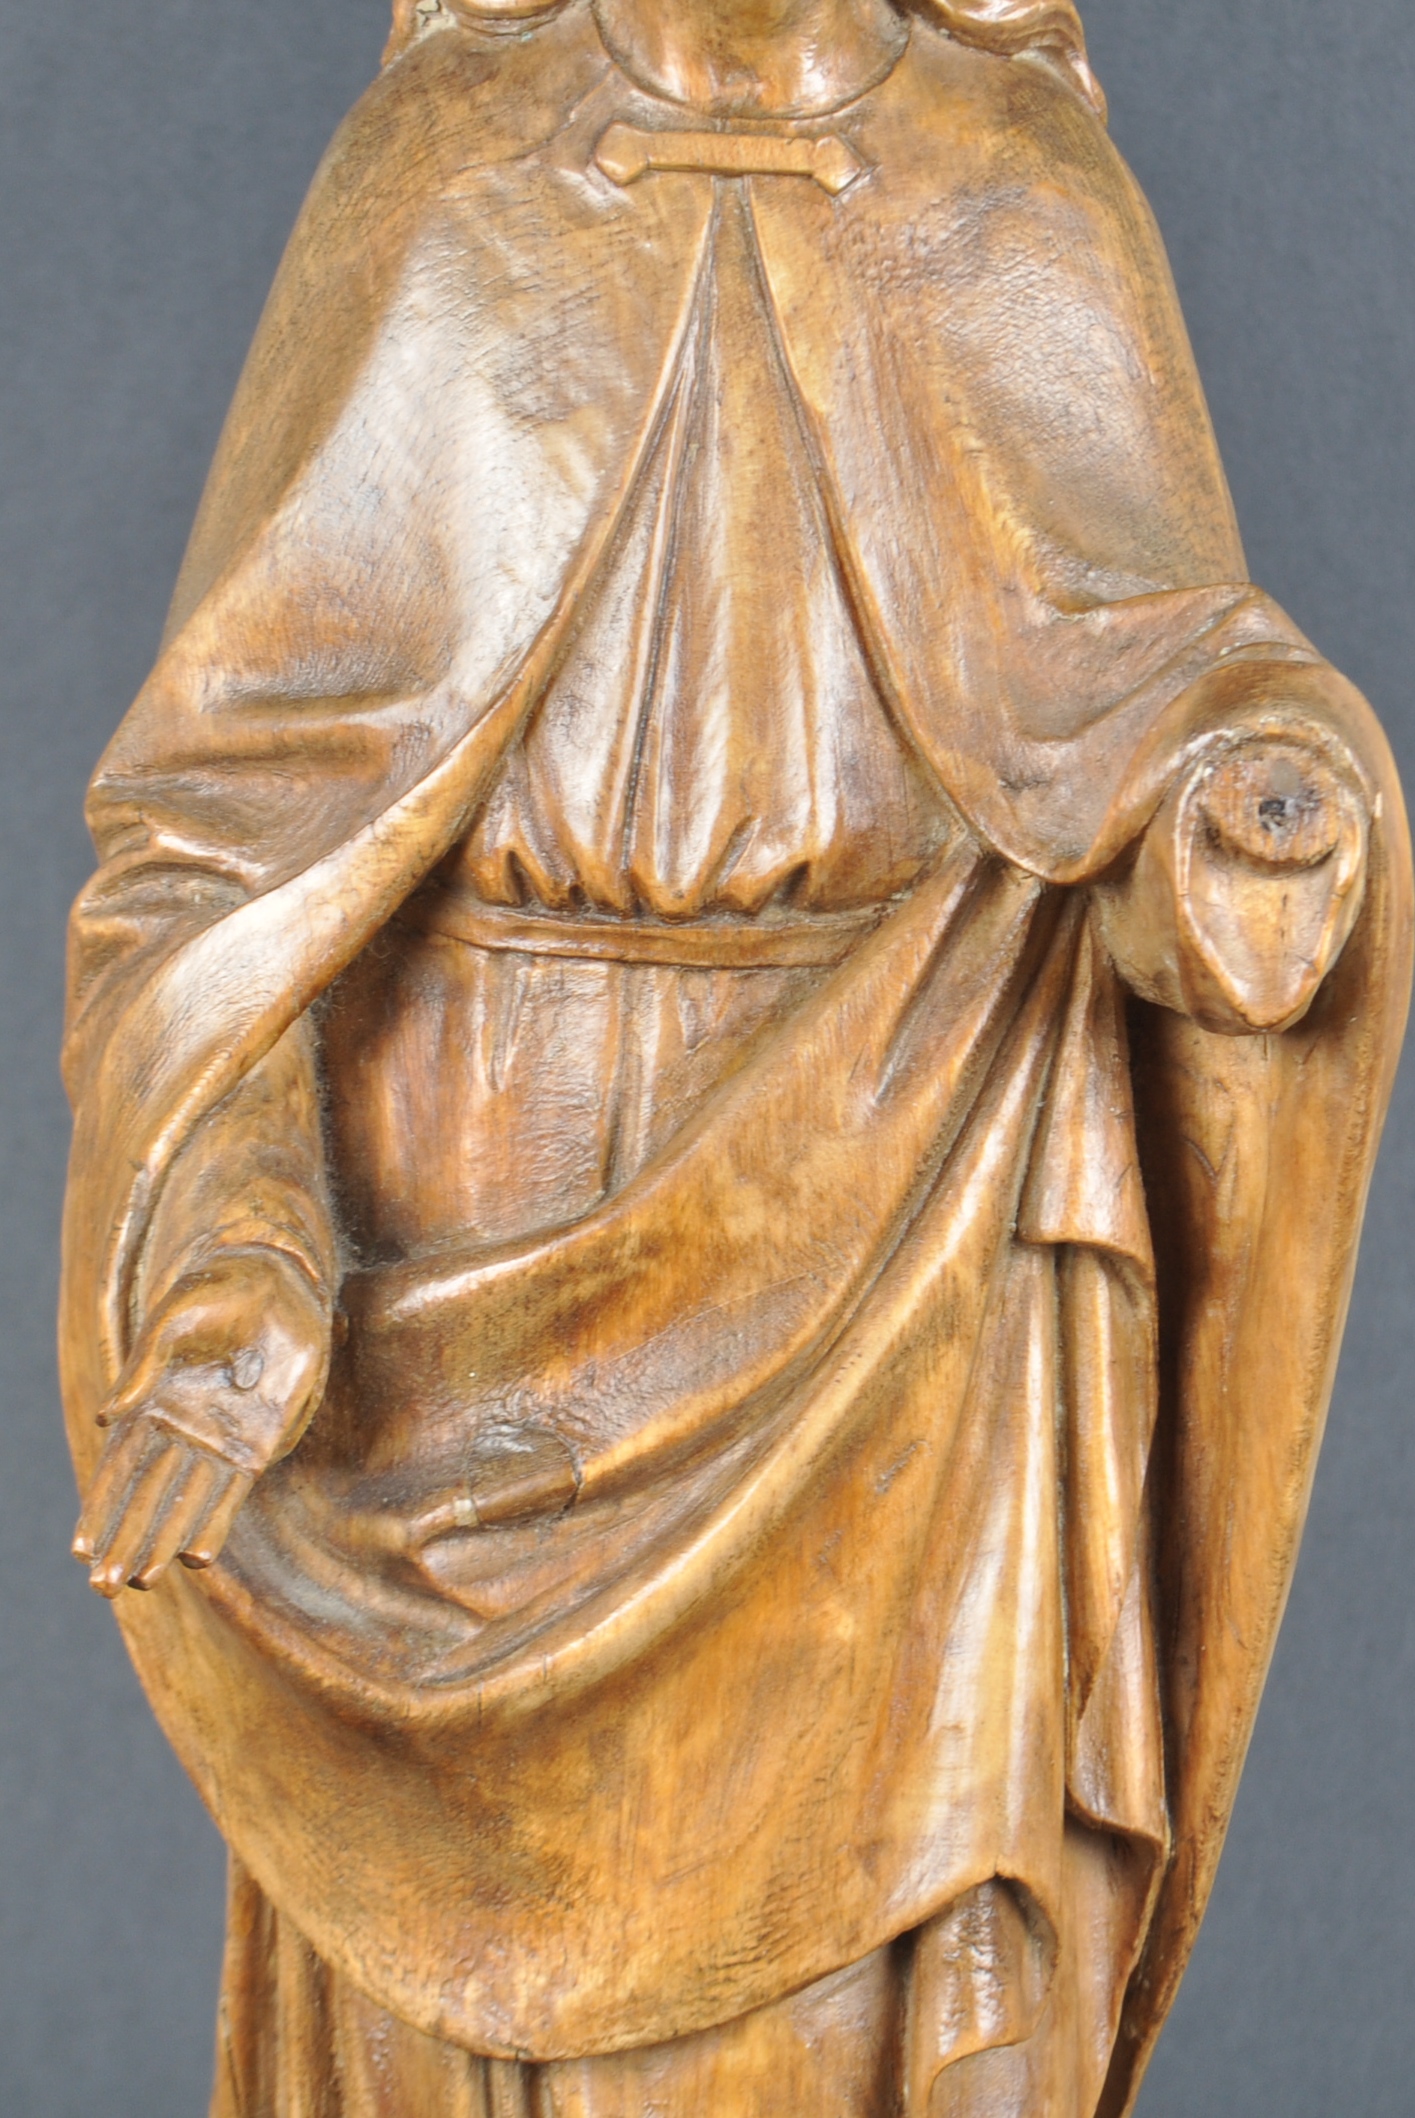 LARGE WALNUT CARVING OF THE VIRGIN MARY - Image 3 of 7